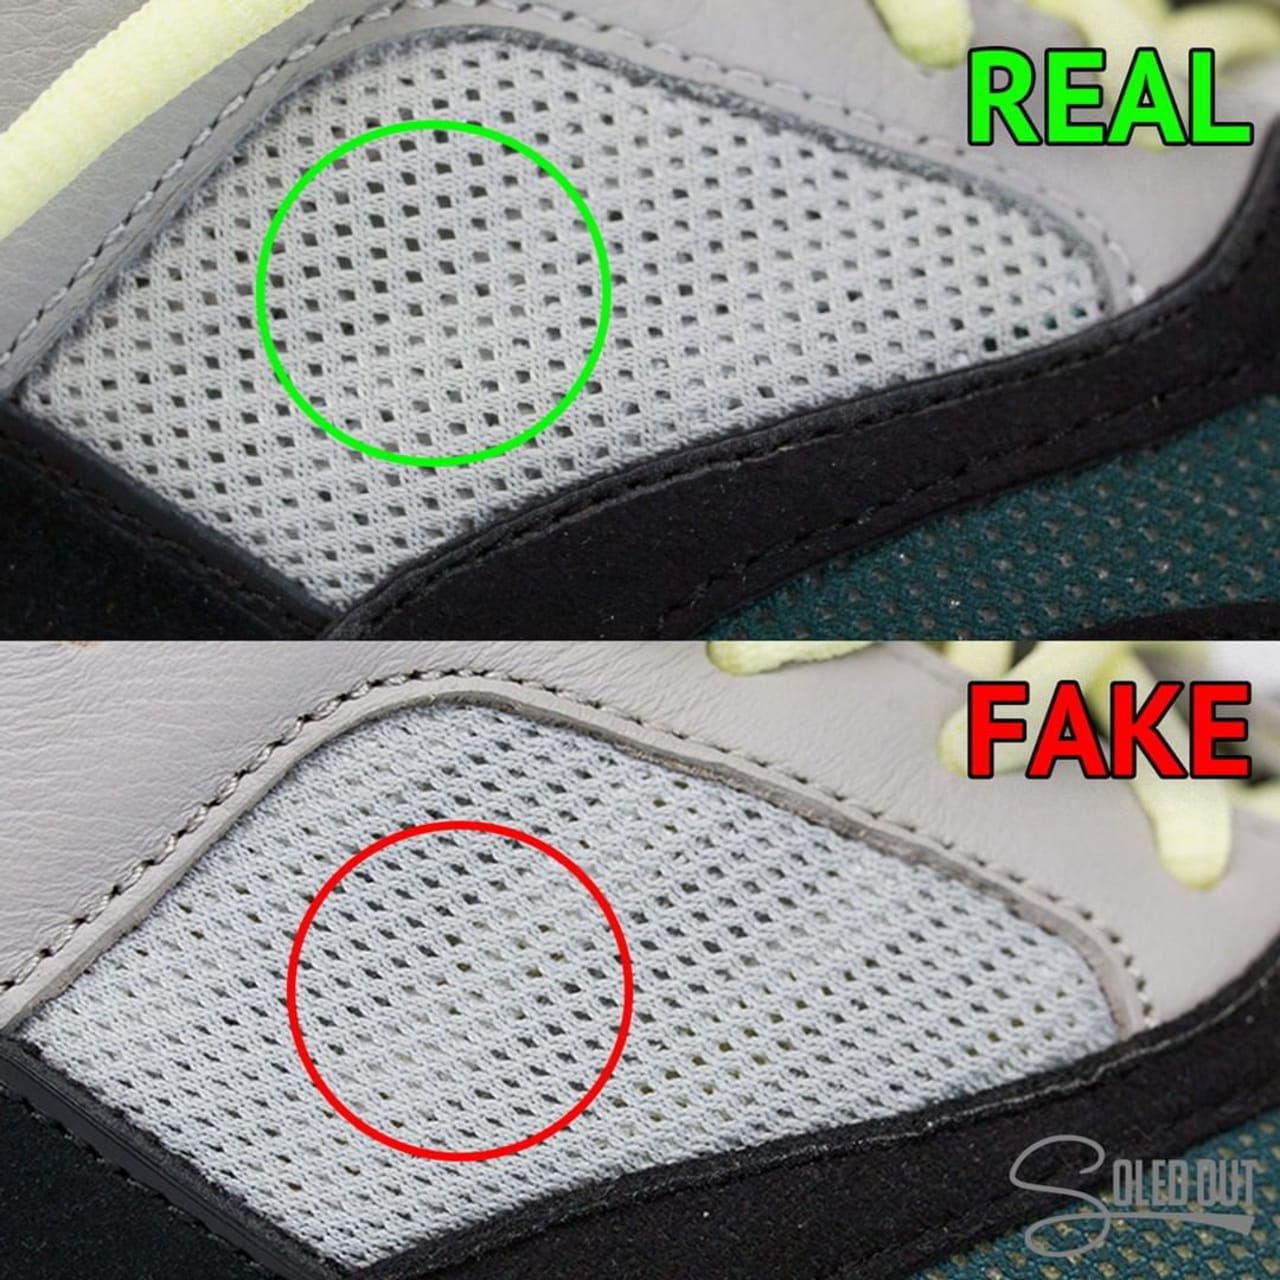 Ant drop reel How To Tell If Your Adidas Yeezy Boost 700 Are Real or Fake | Sole Collector